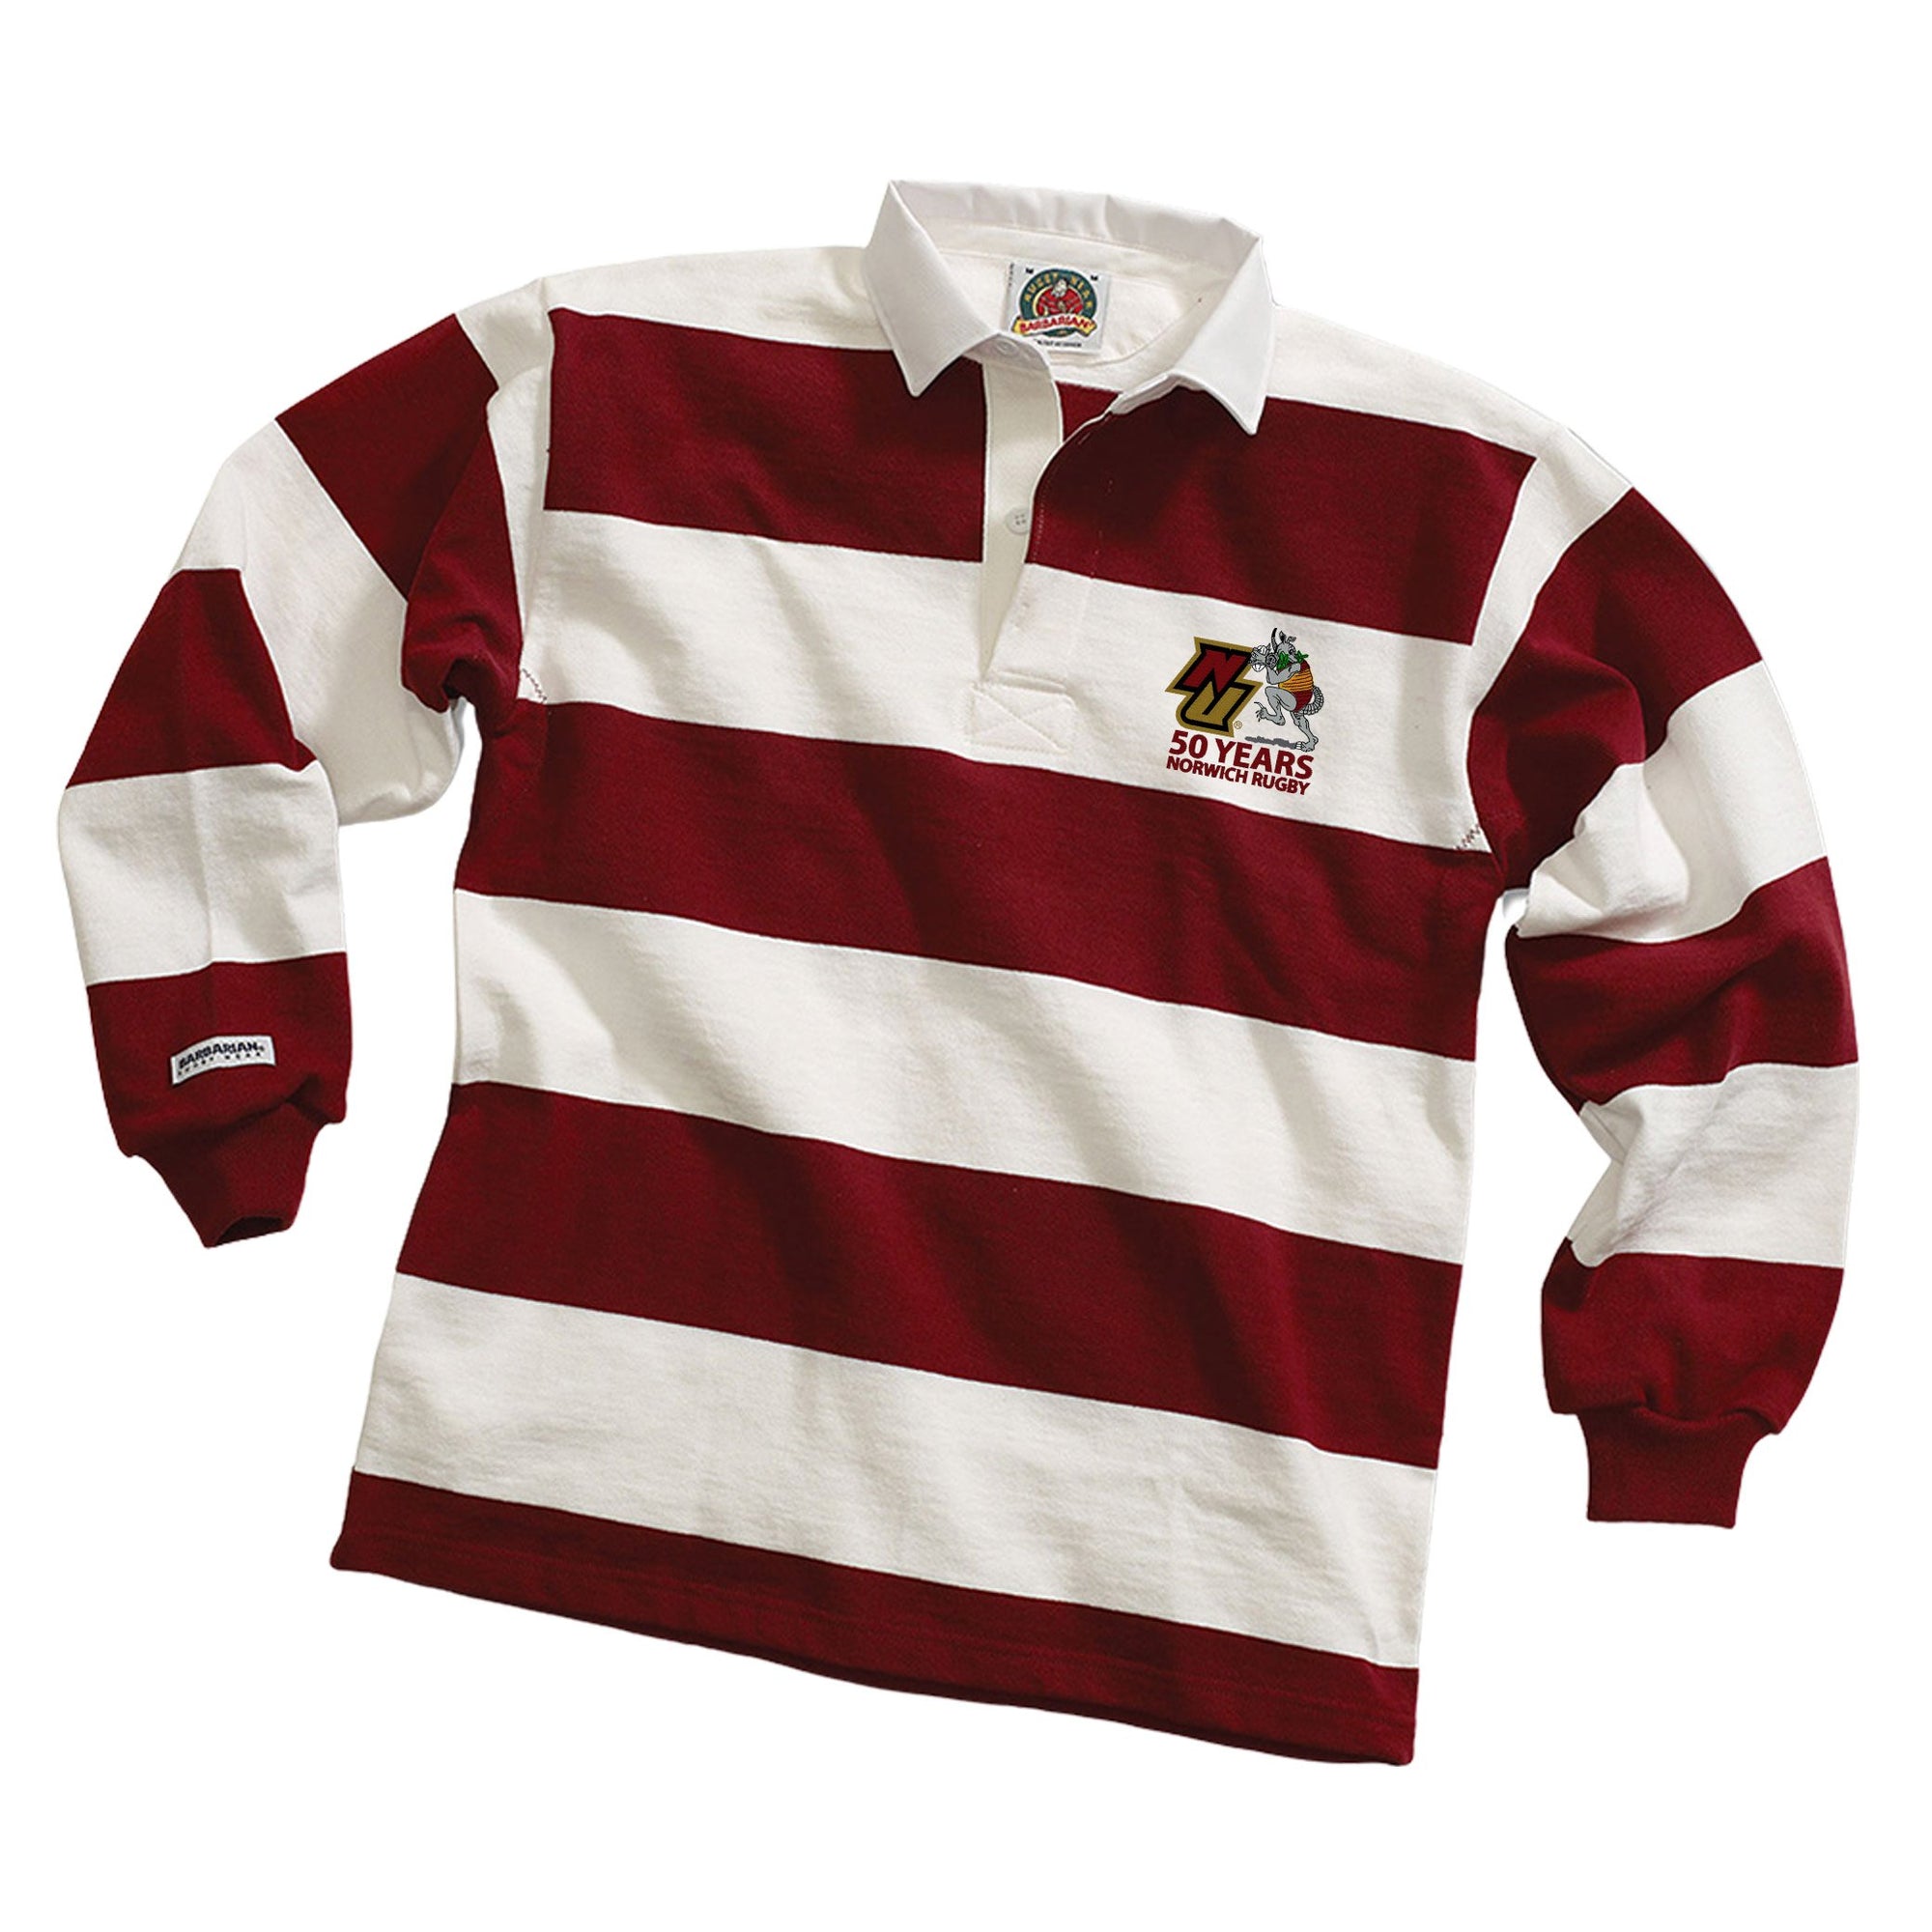 Rugby Imports Norwich Rugby 50th Anniversary Hoops Jersey